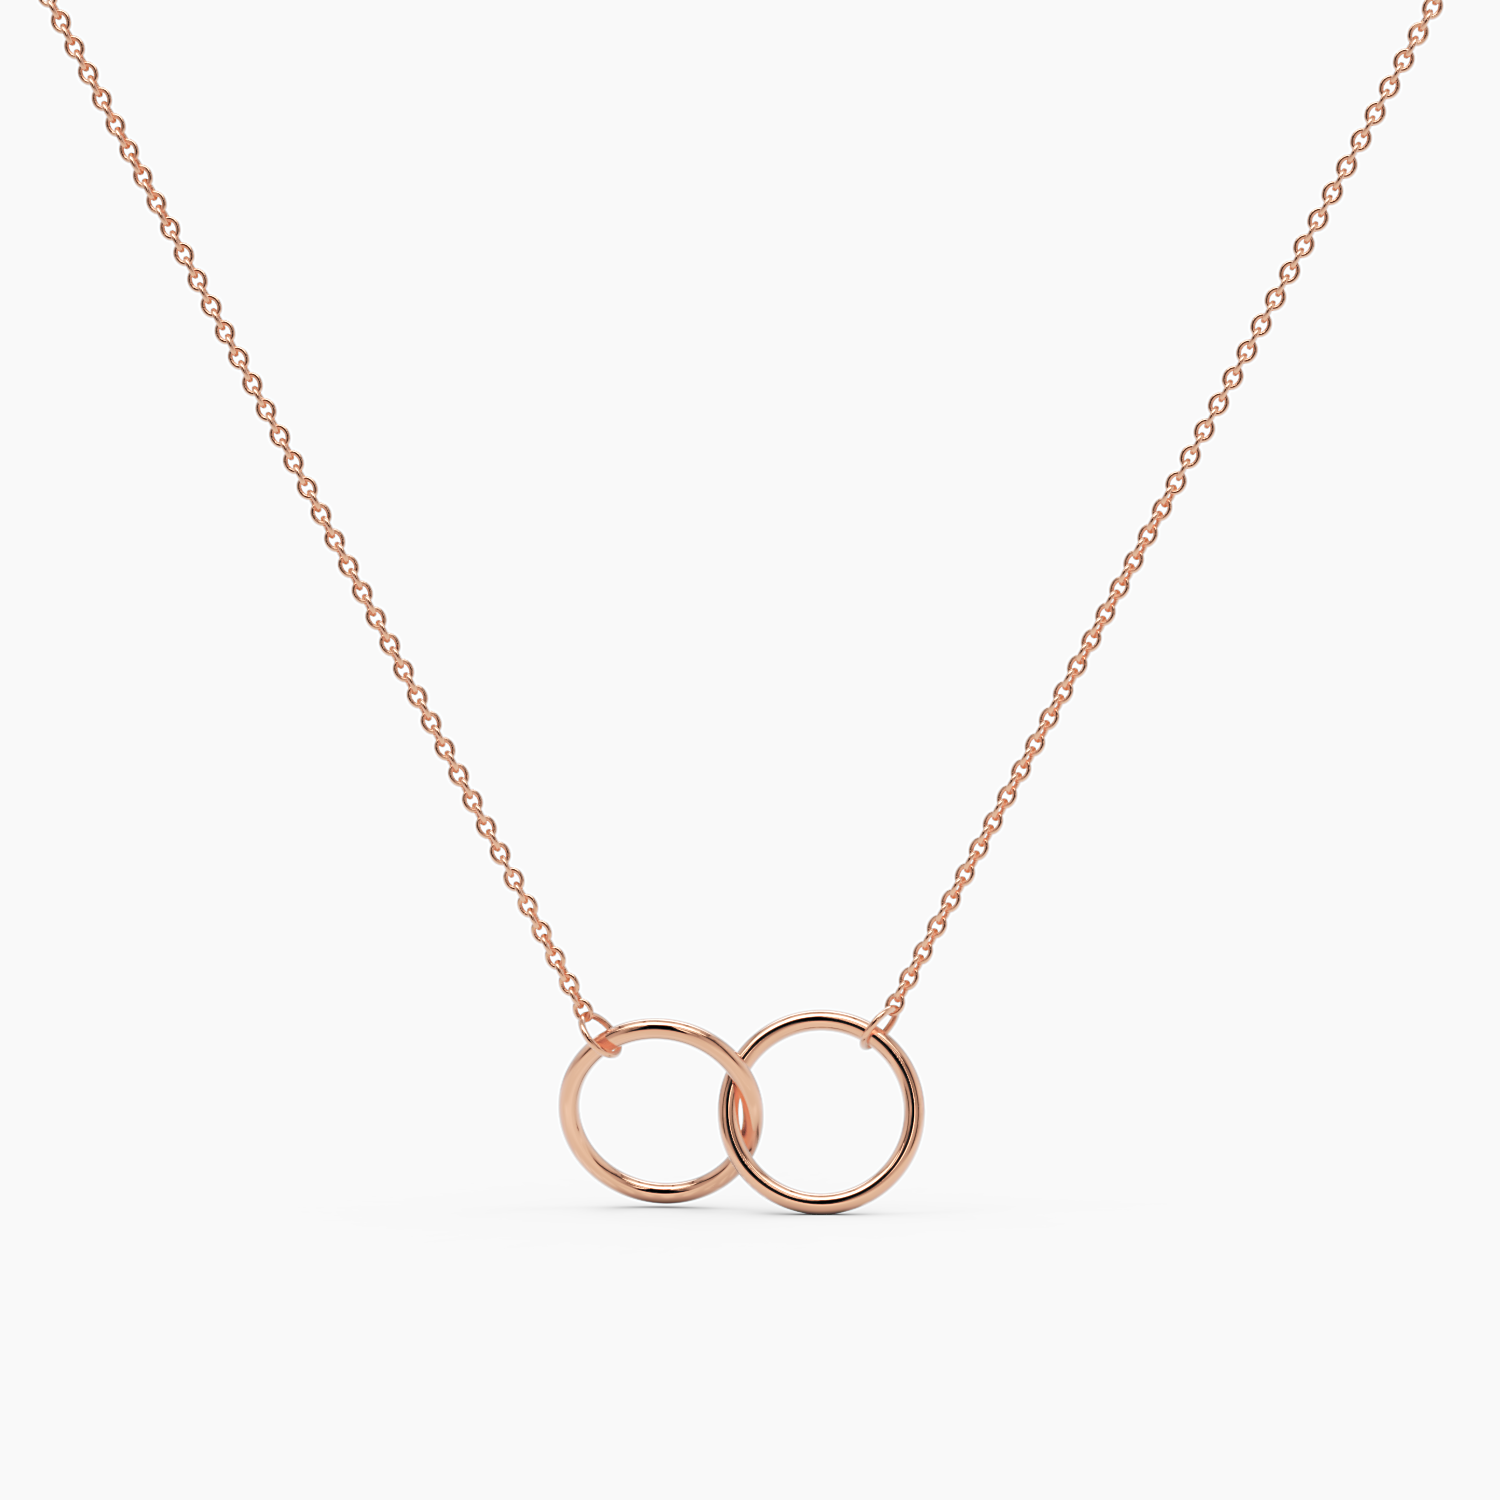 Interlinked Gold Circles Necklace